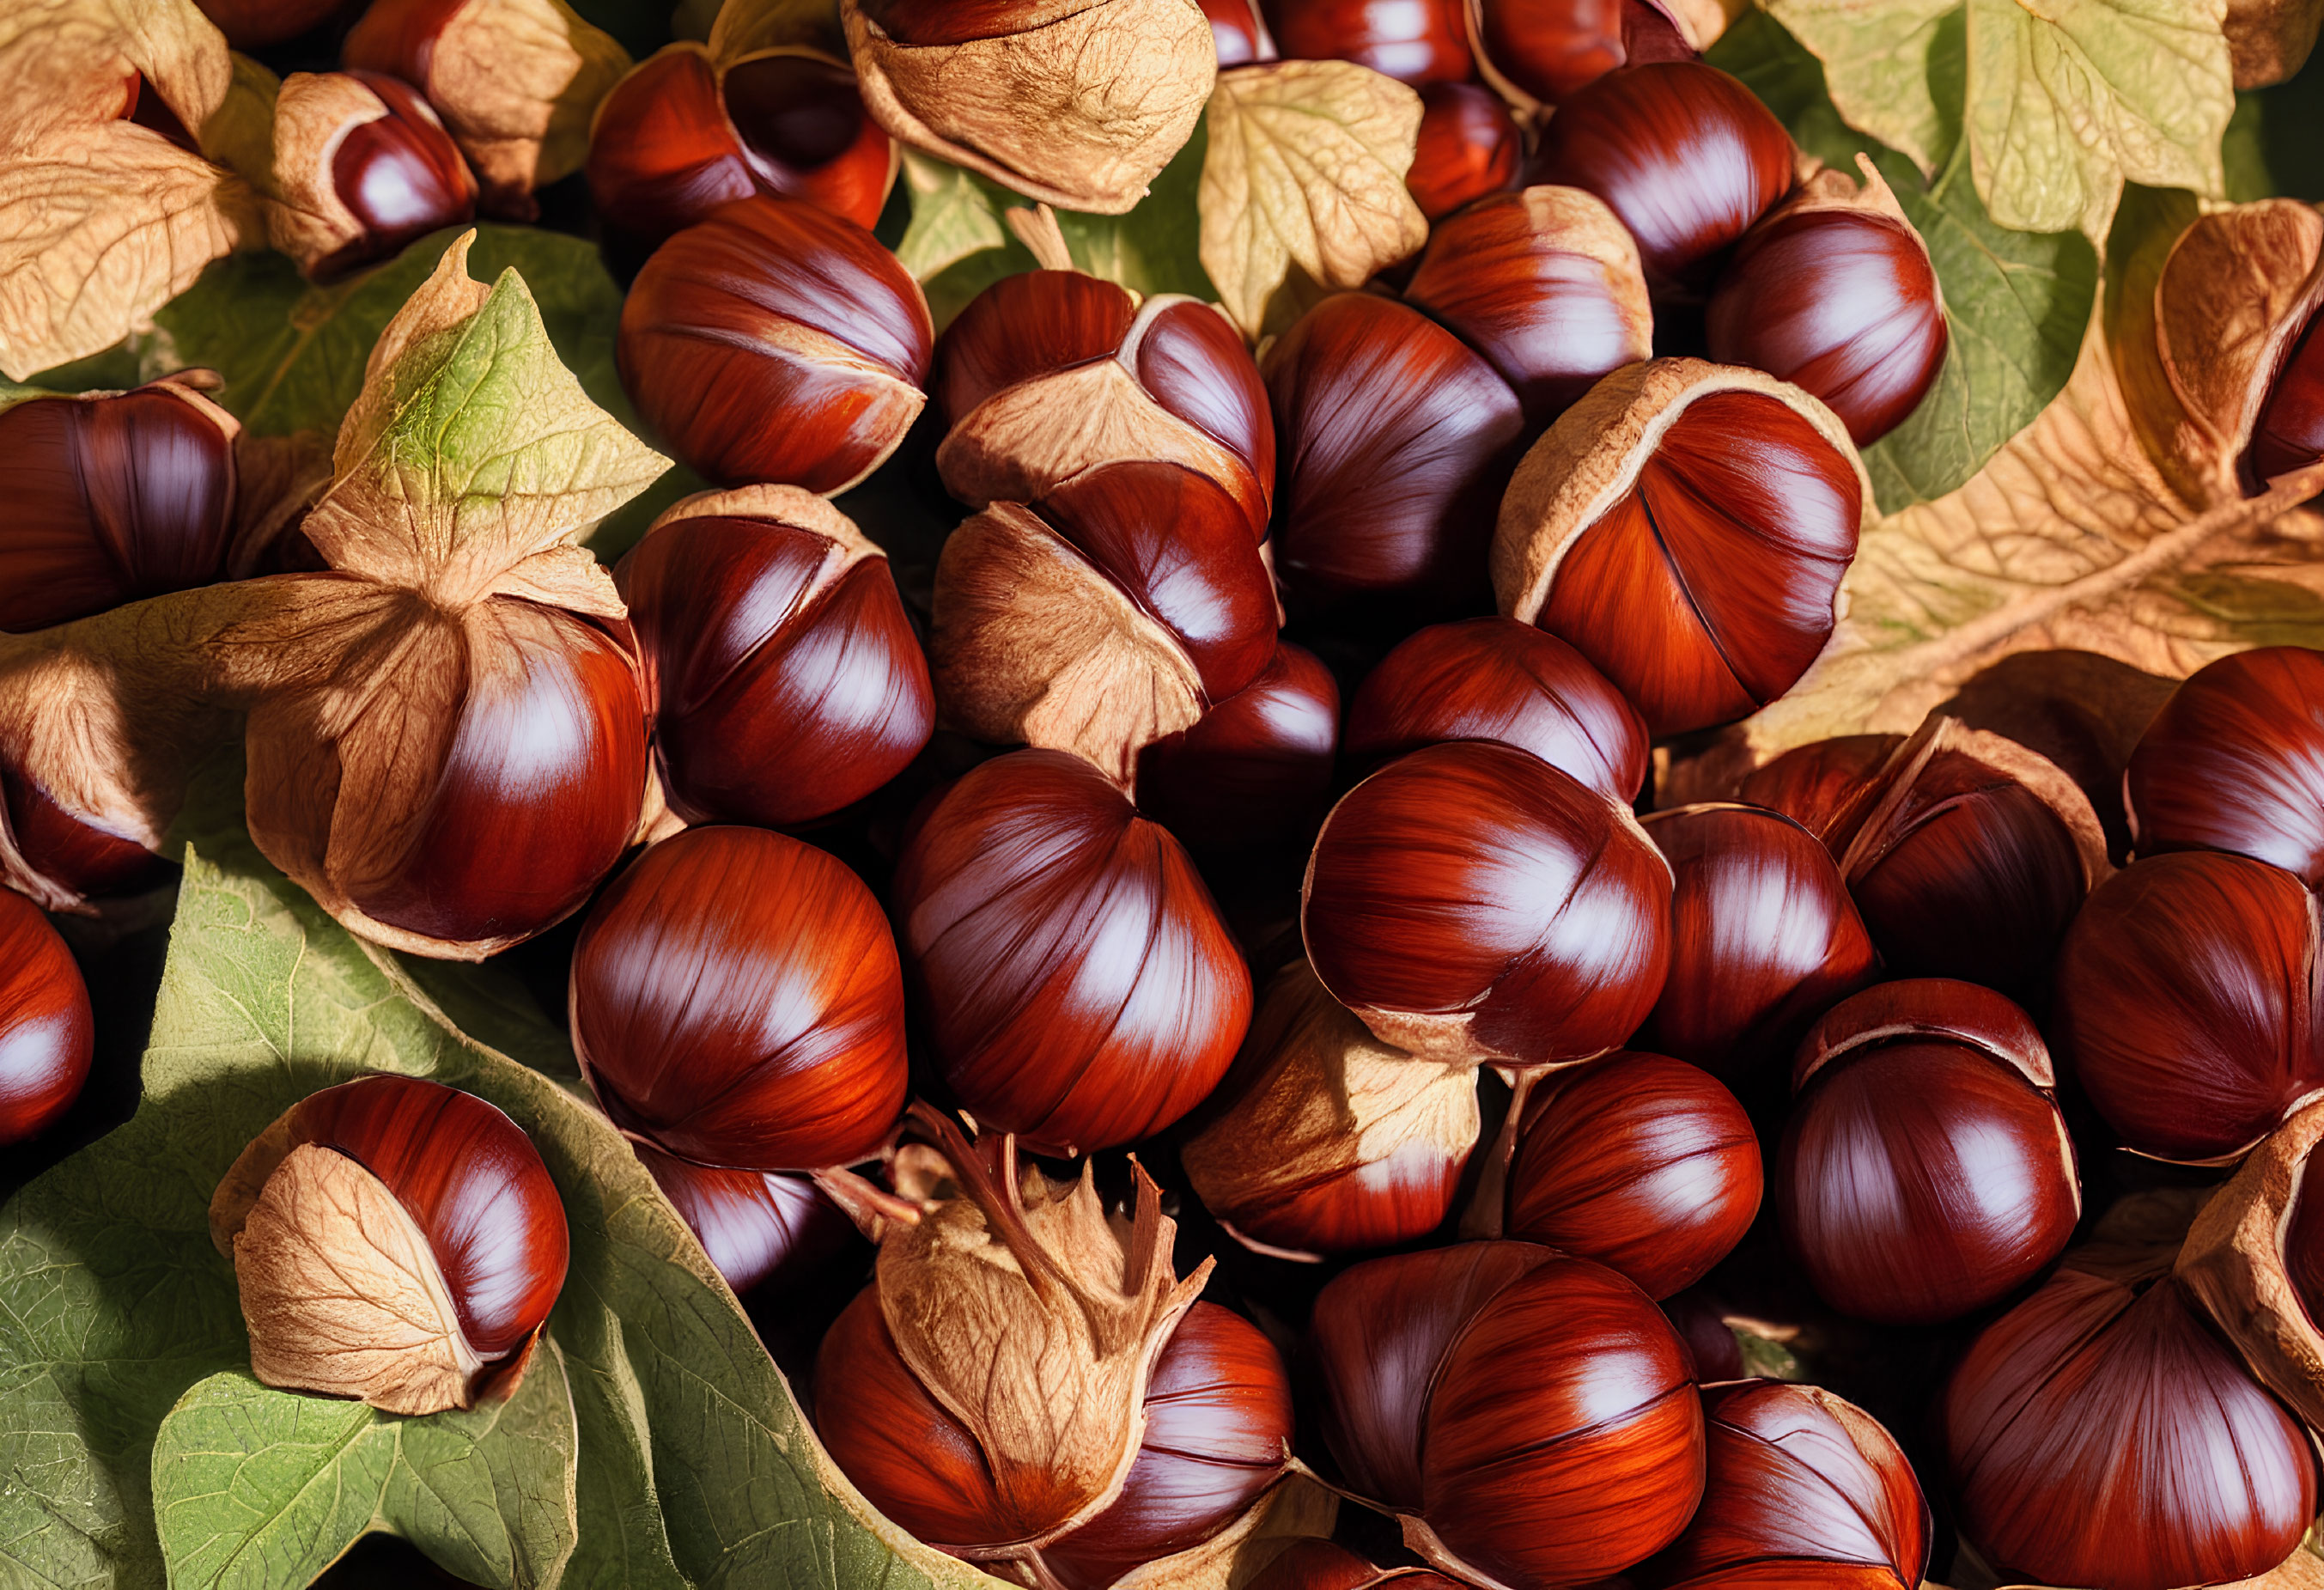 Brown Chestnuts with Golden Husks on Green Leaves: Autumn Harvest Texture